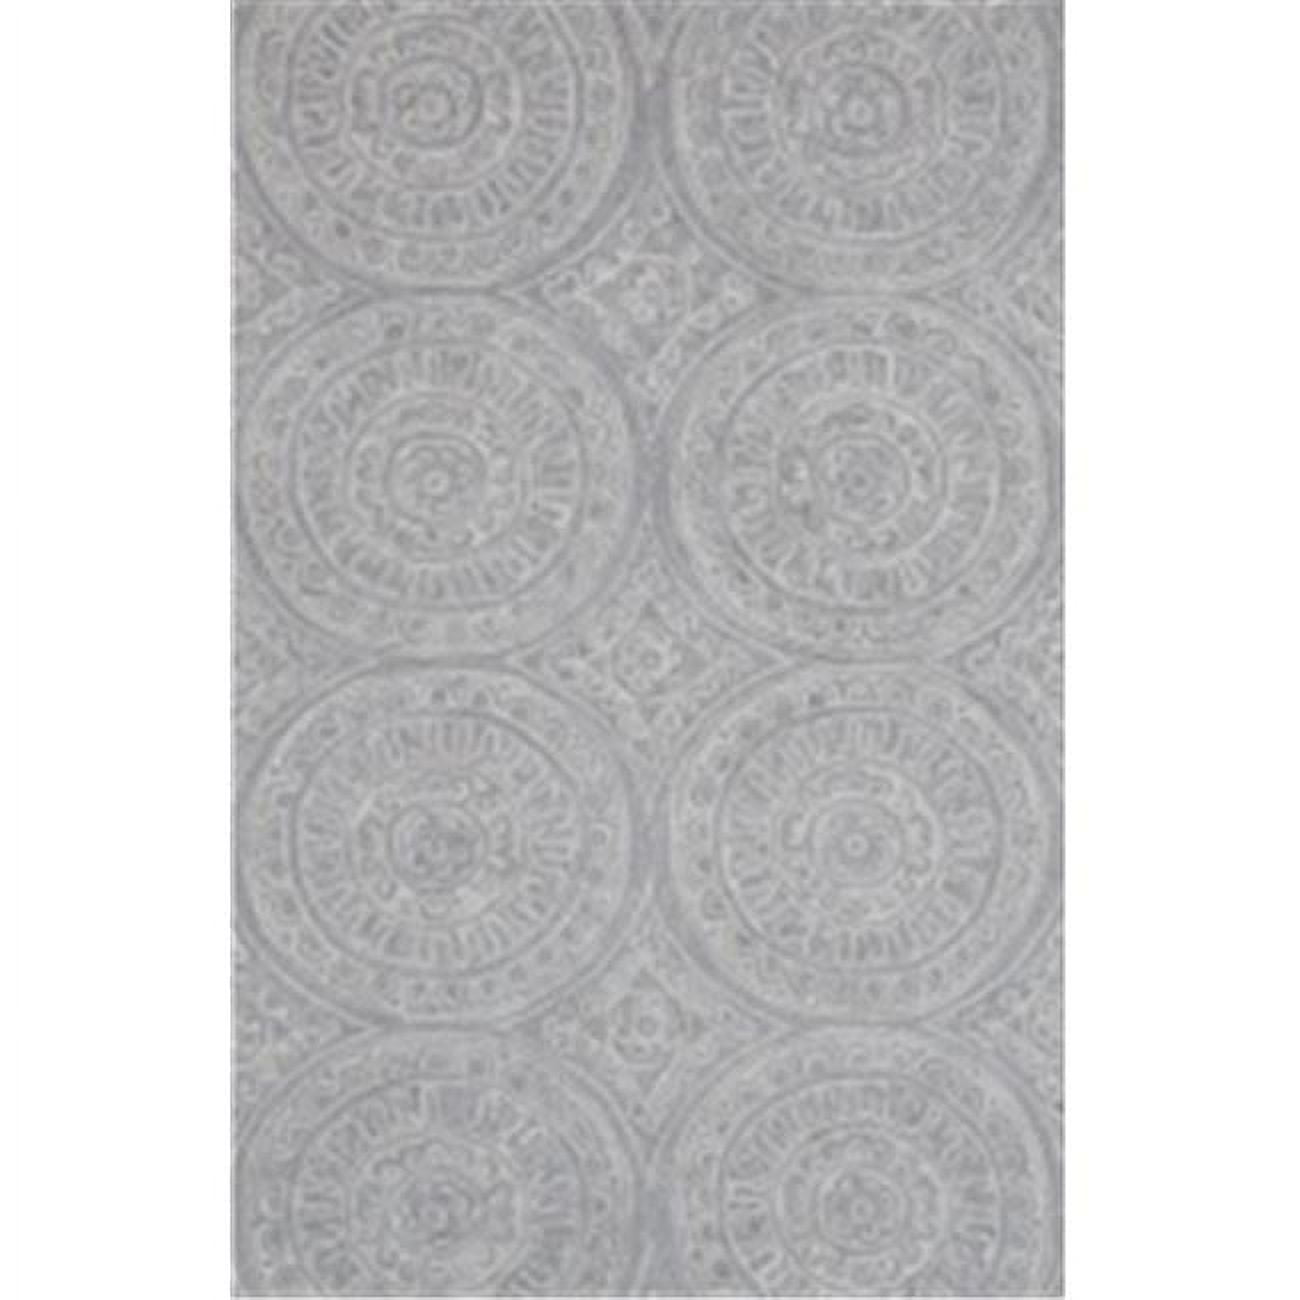 Picture of Dynamic Rugs GL10147866140 Galleria Rugs, Silver - 9.2 x 12.6 in.